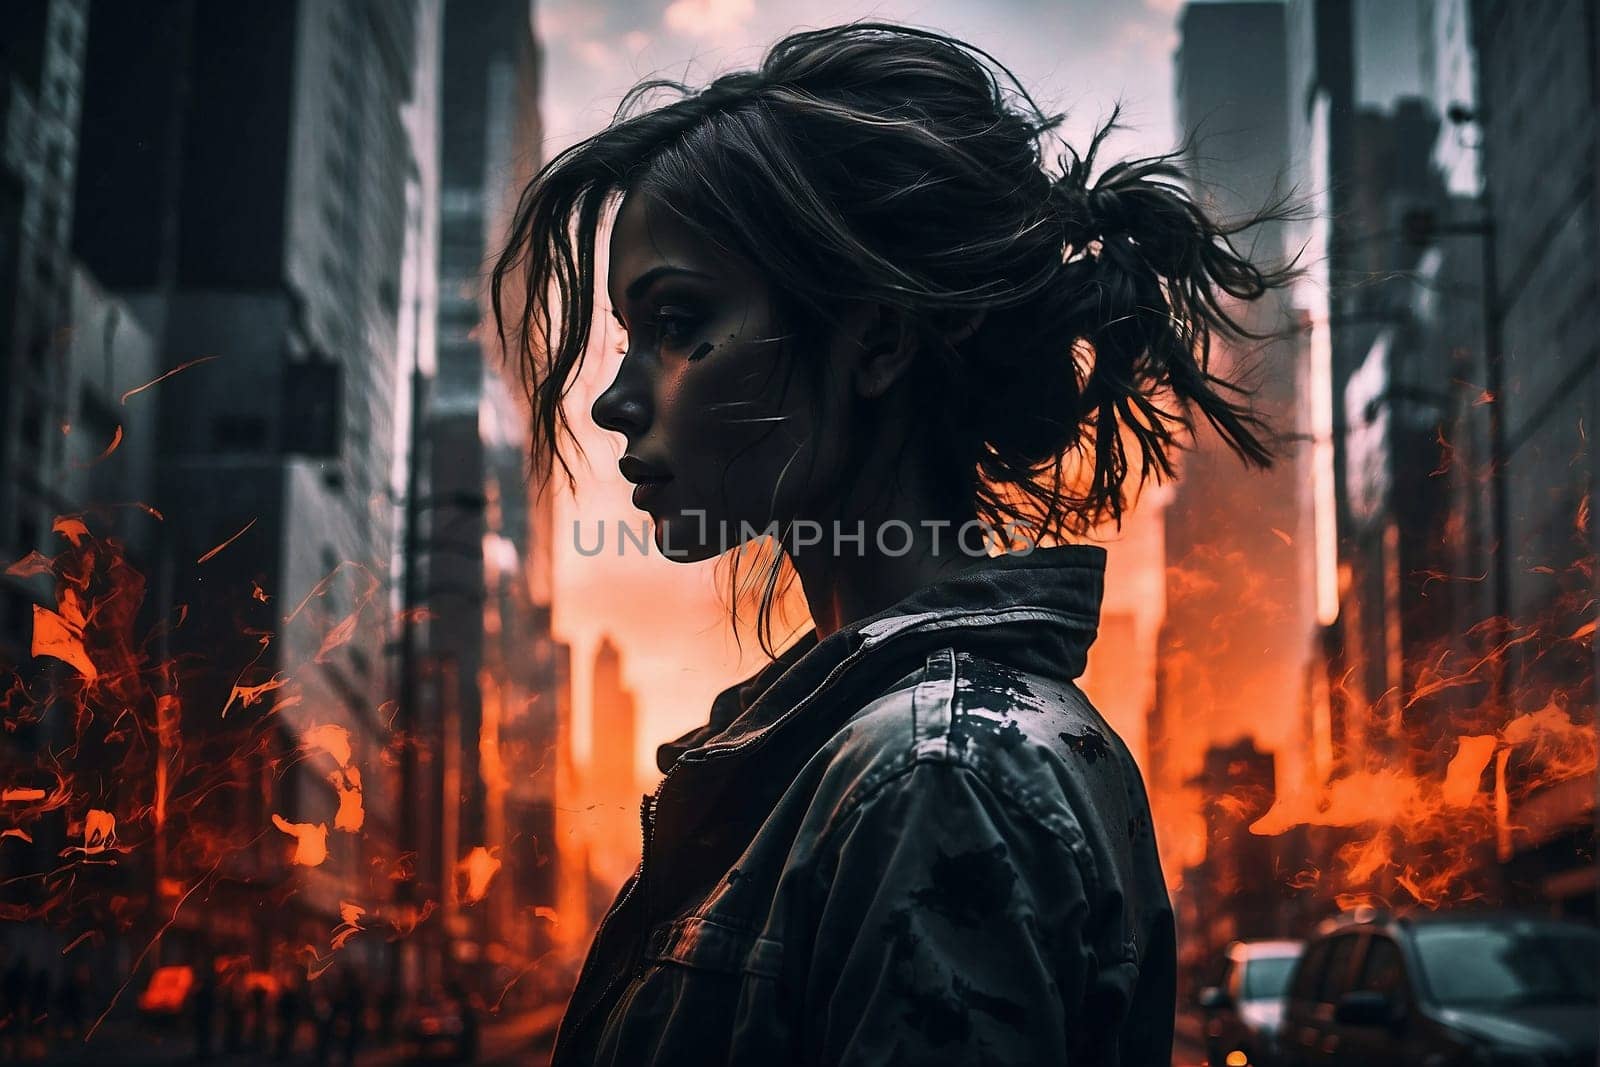 A woman confidently stands in the bustling city, surrounded by tall buildings and busy streets.